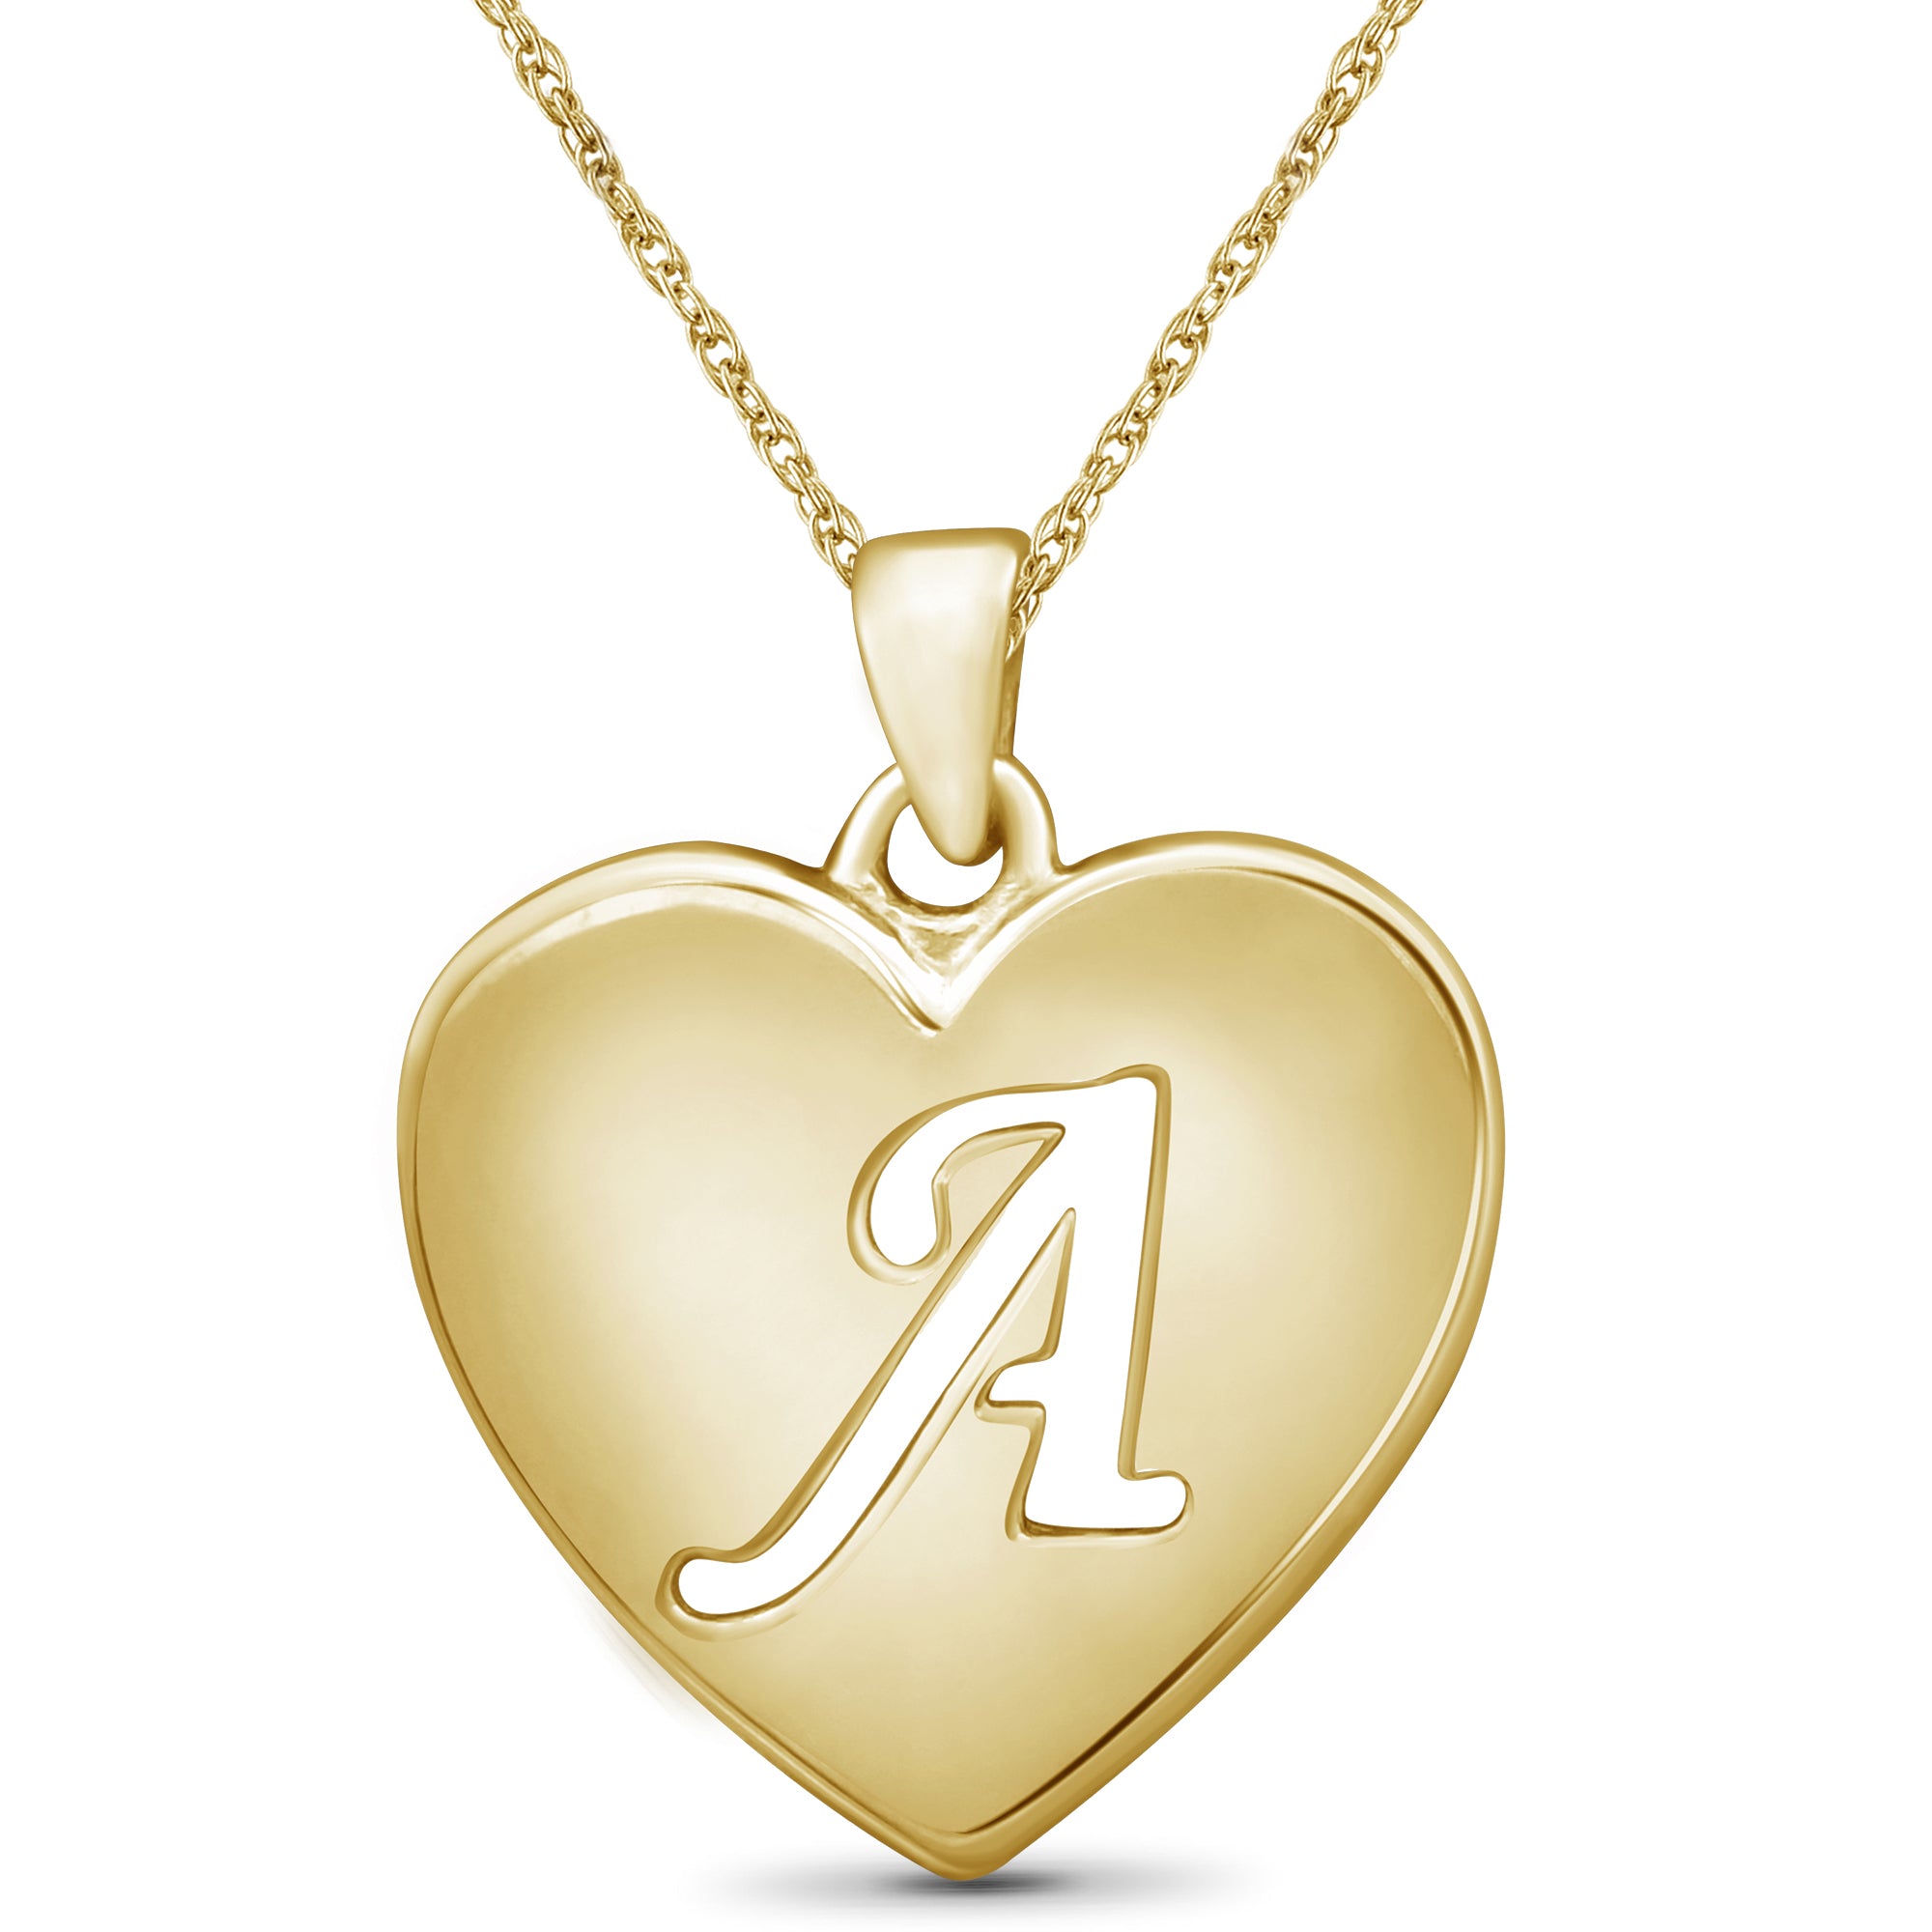 8 Necklaces to Give to Your Girlfriend ...